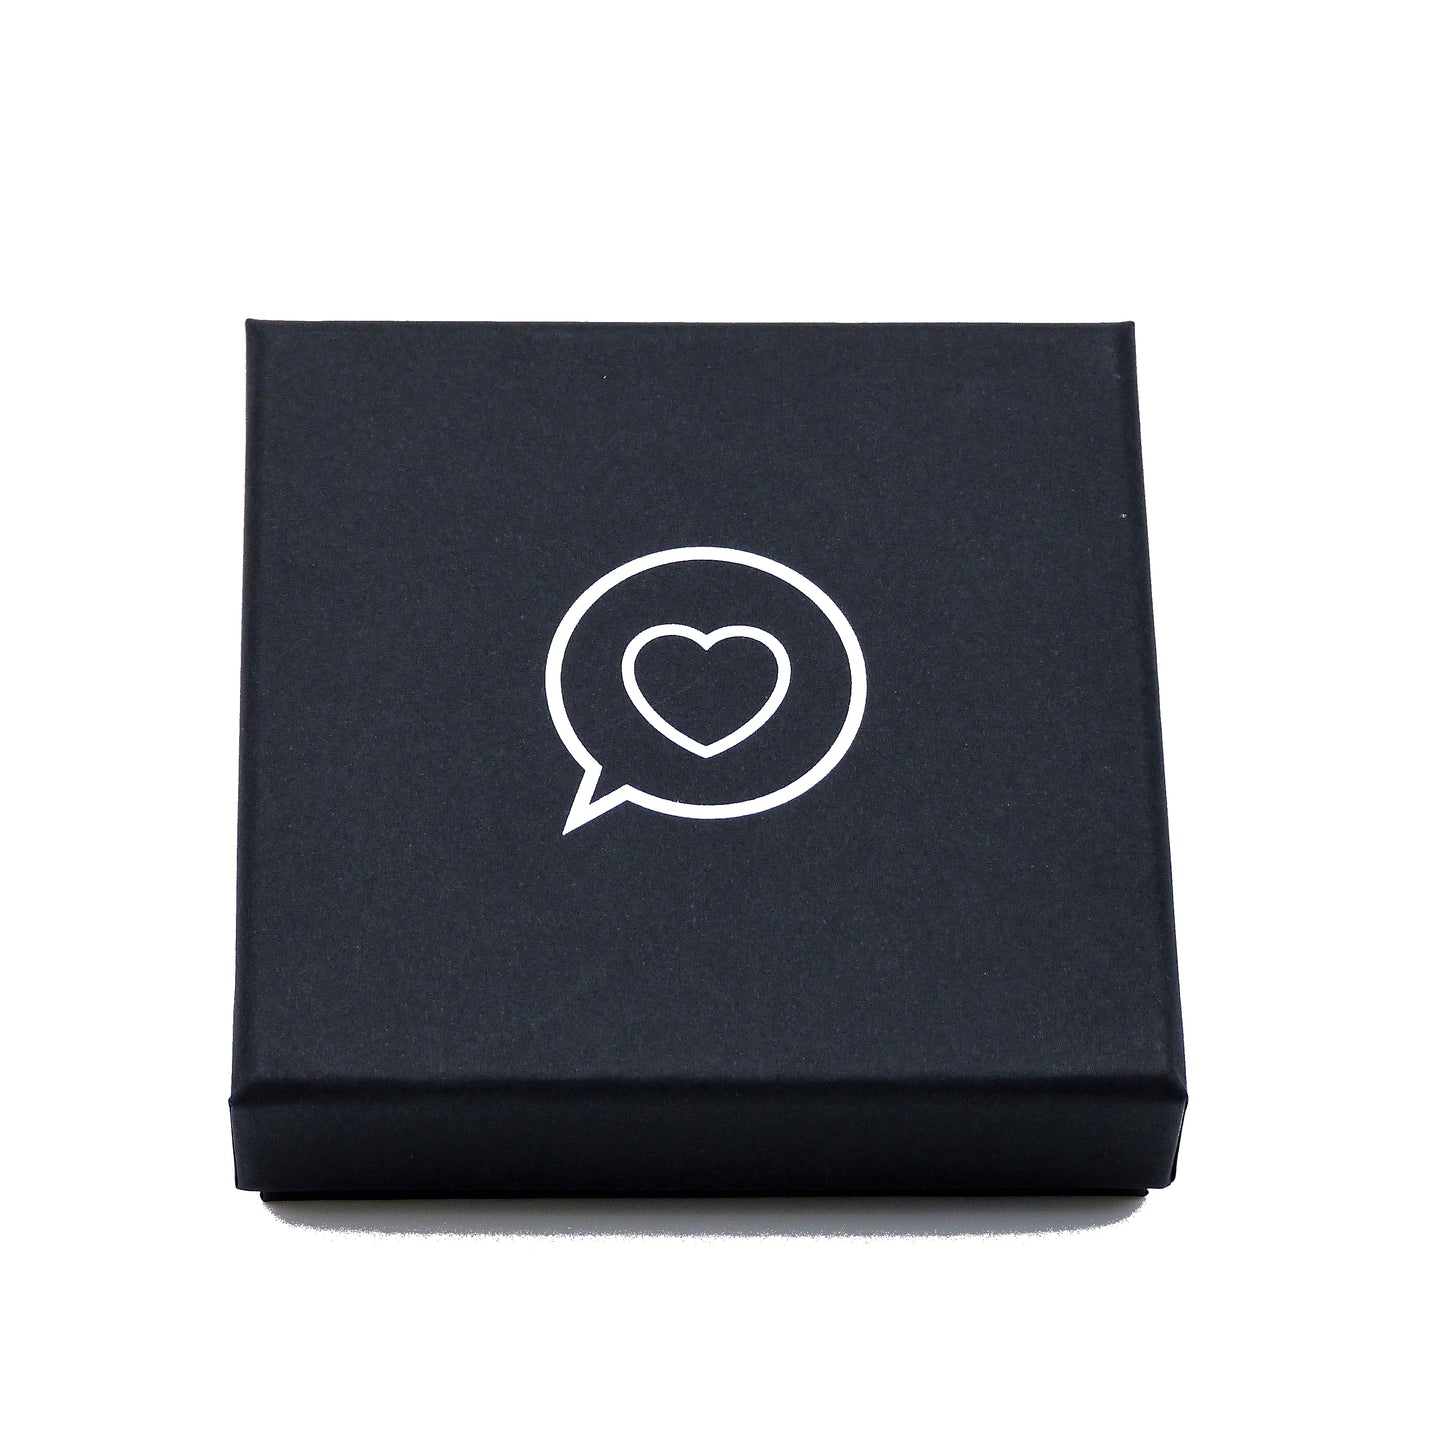 Black bracelet gift box with white foil inlay of the Roo Betty logo of a heart in a speech bubble.